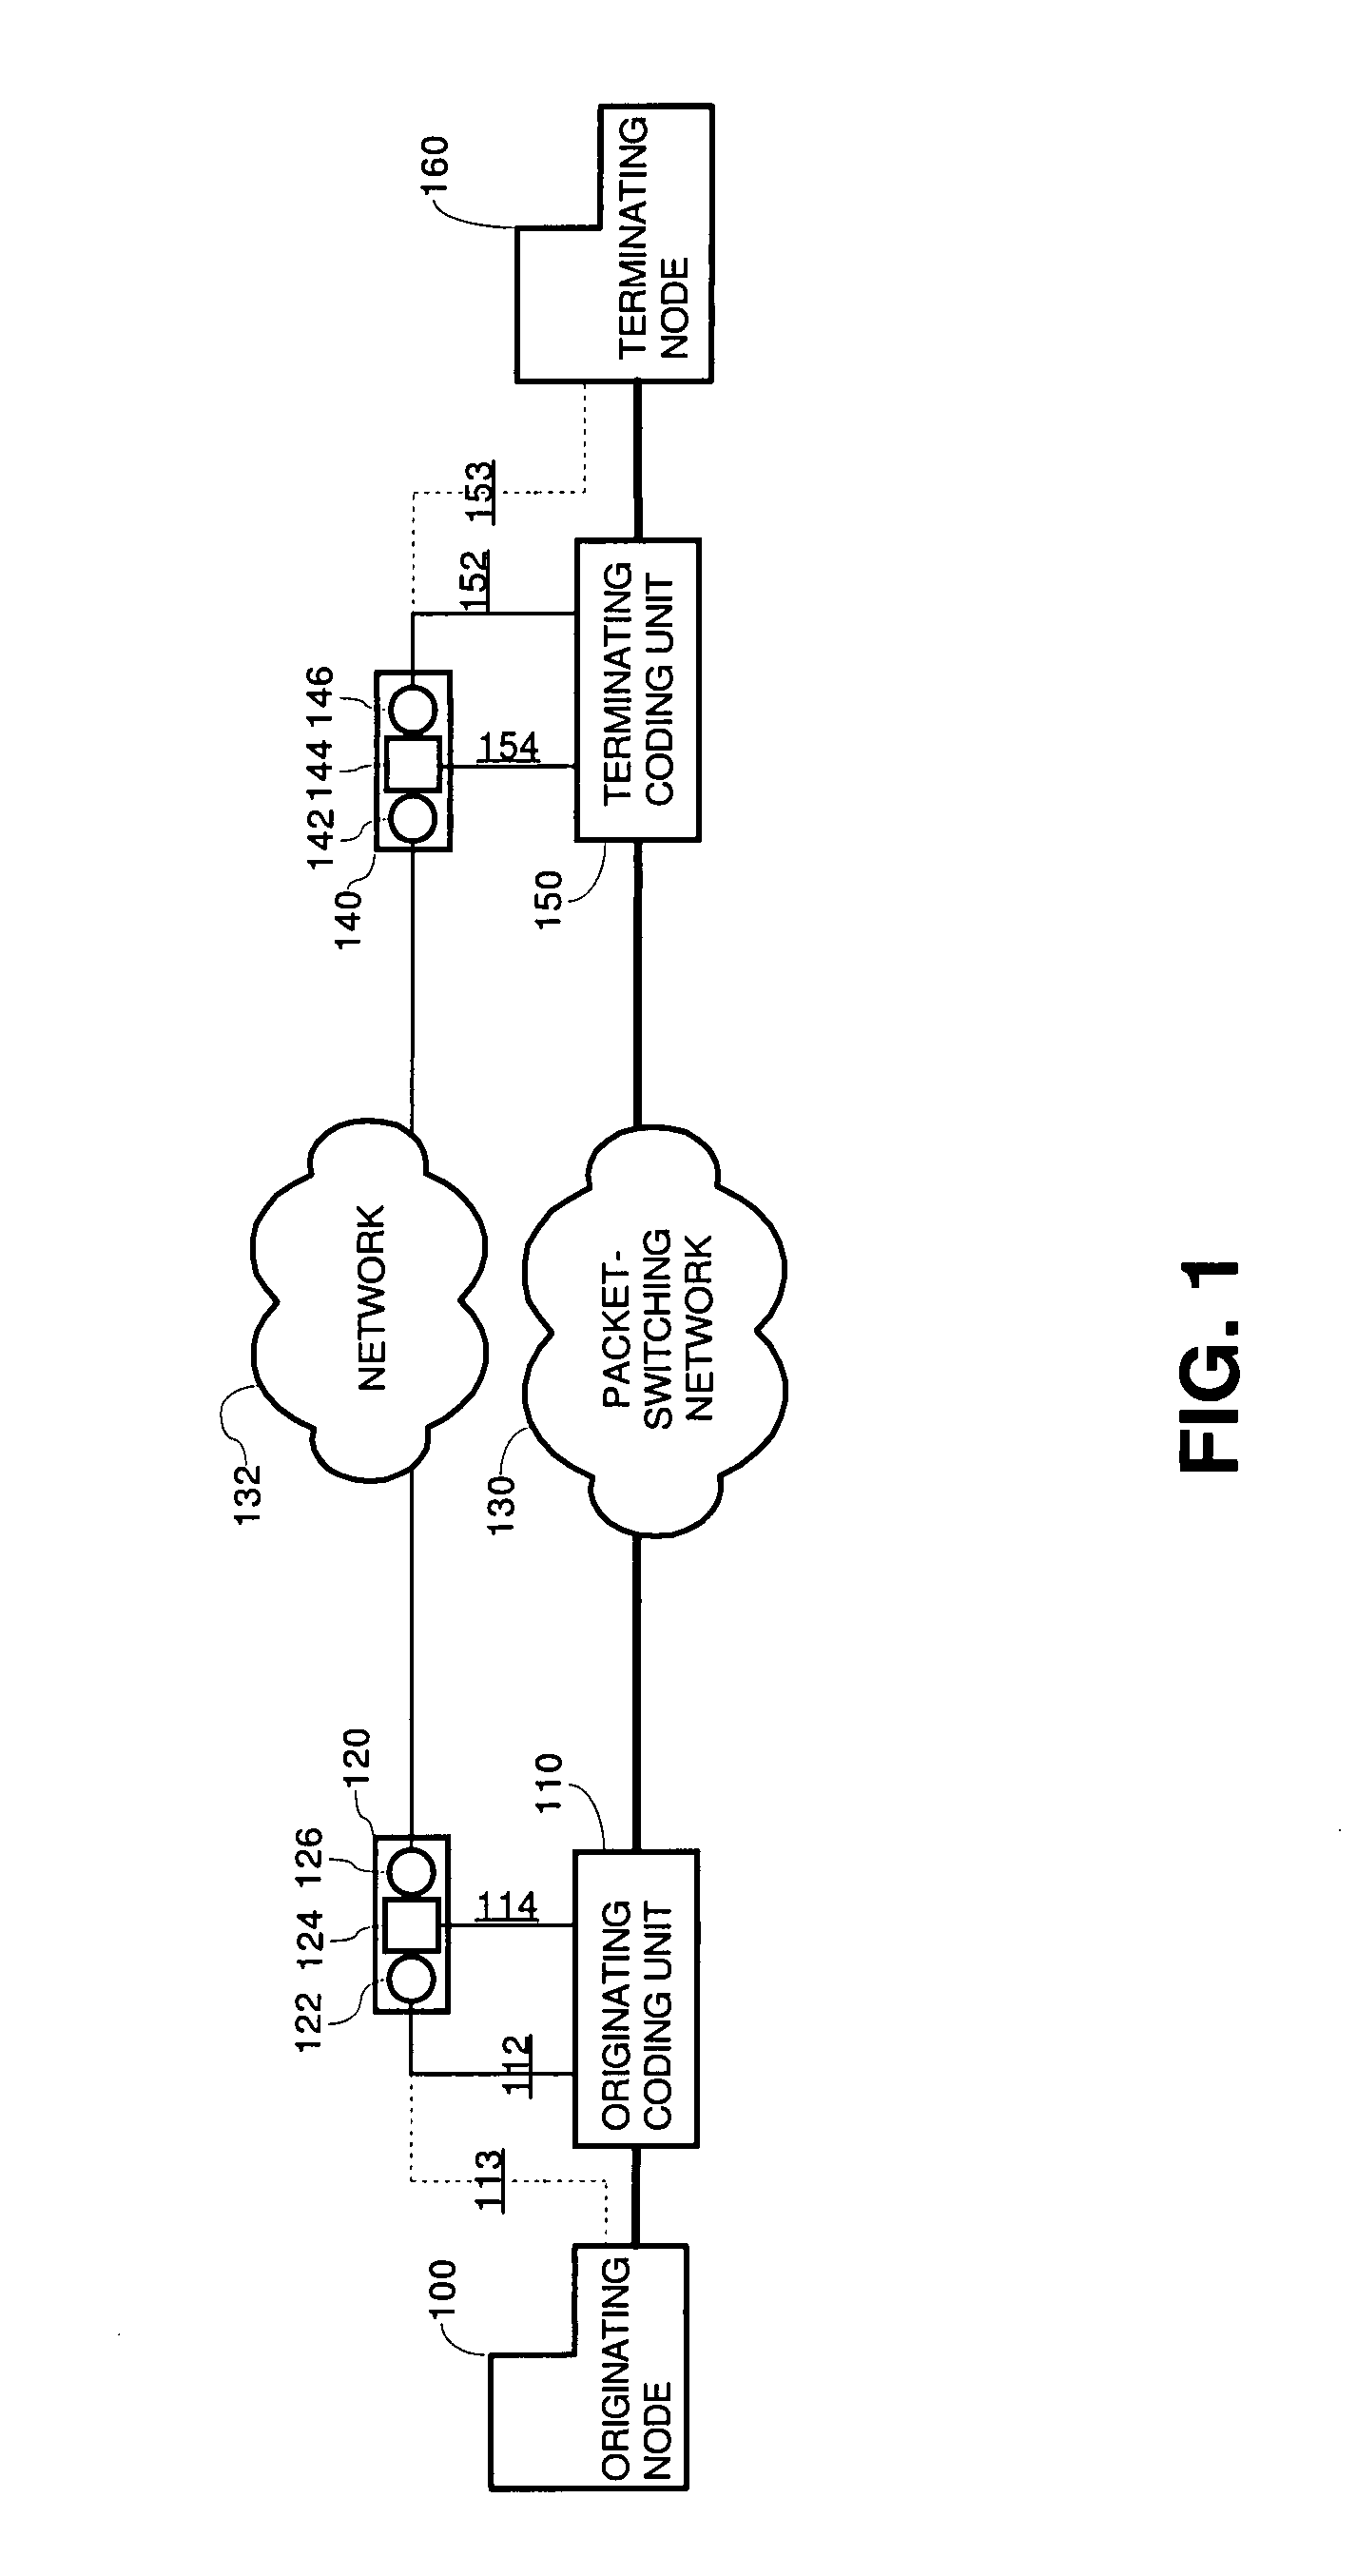 System using a signaling protocol for controlling voice calls originating in a circuit switching telephone network and routed over a packet switching network